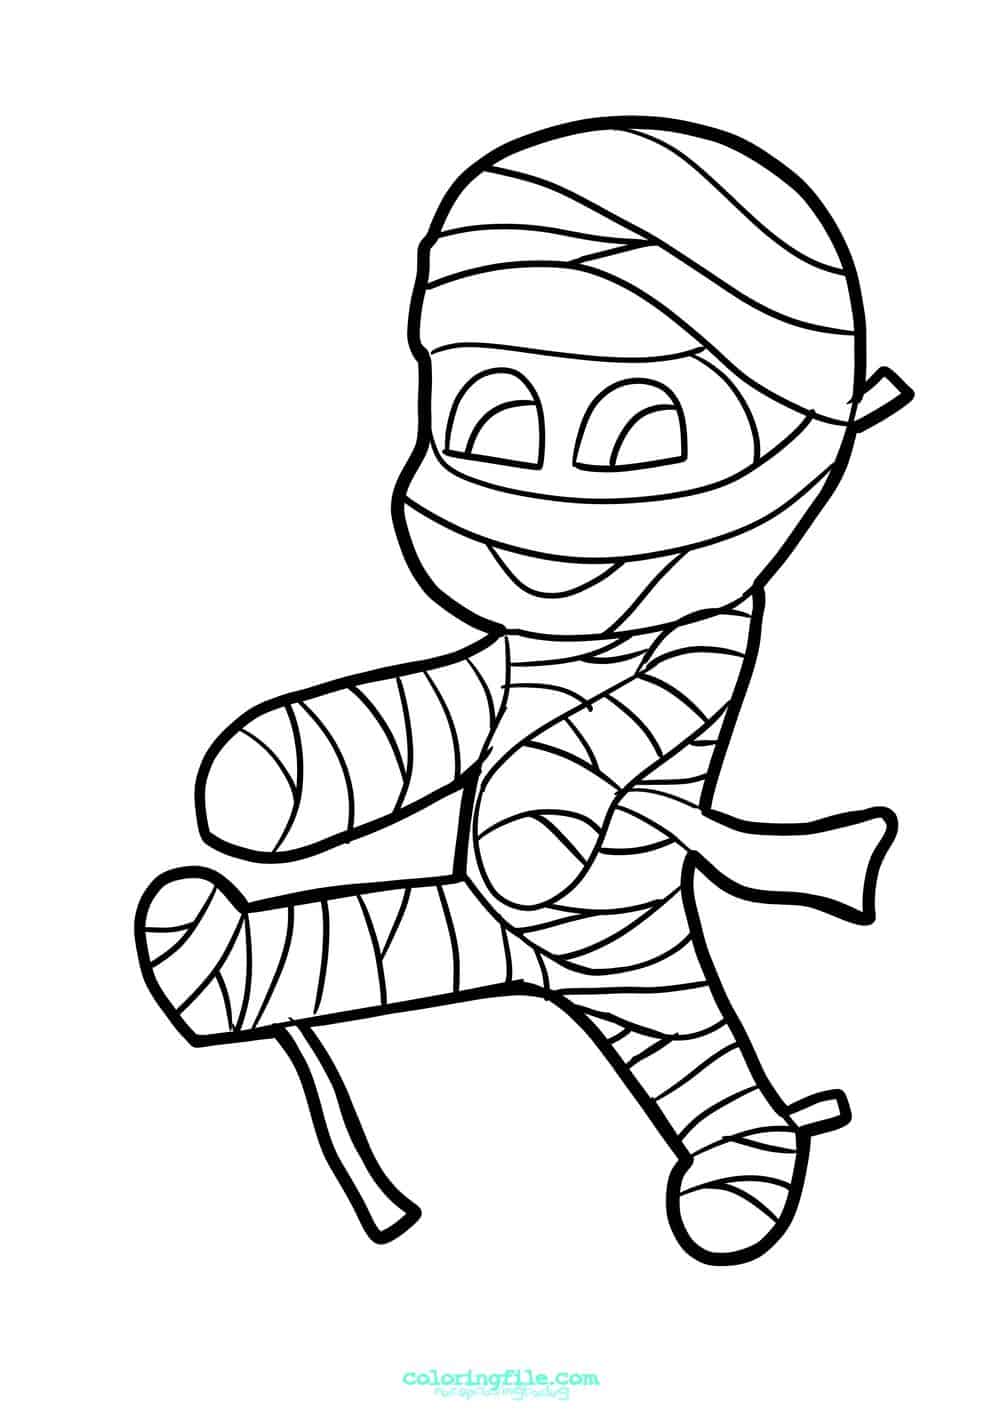 Halloween walking mummy coloring pages